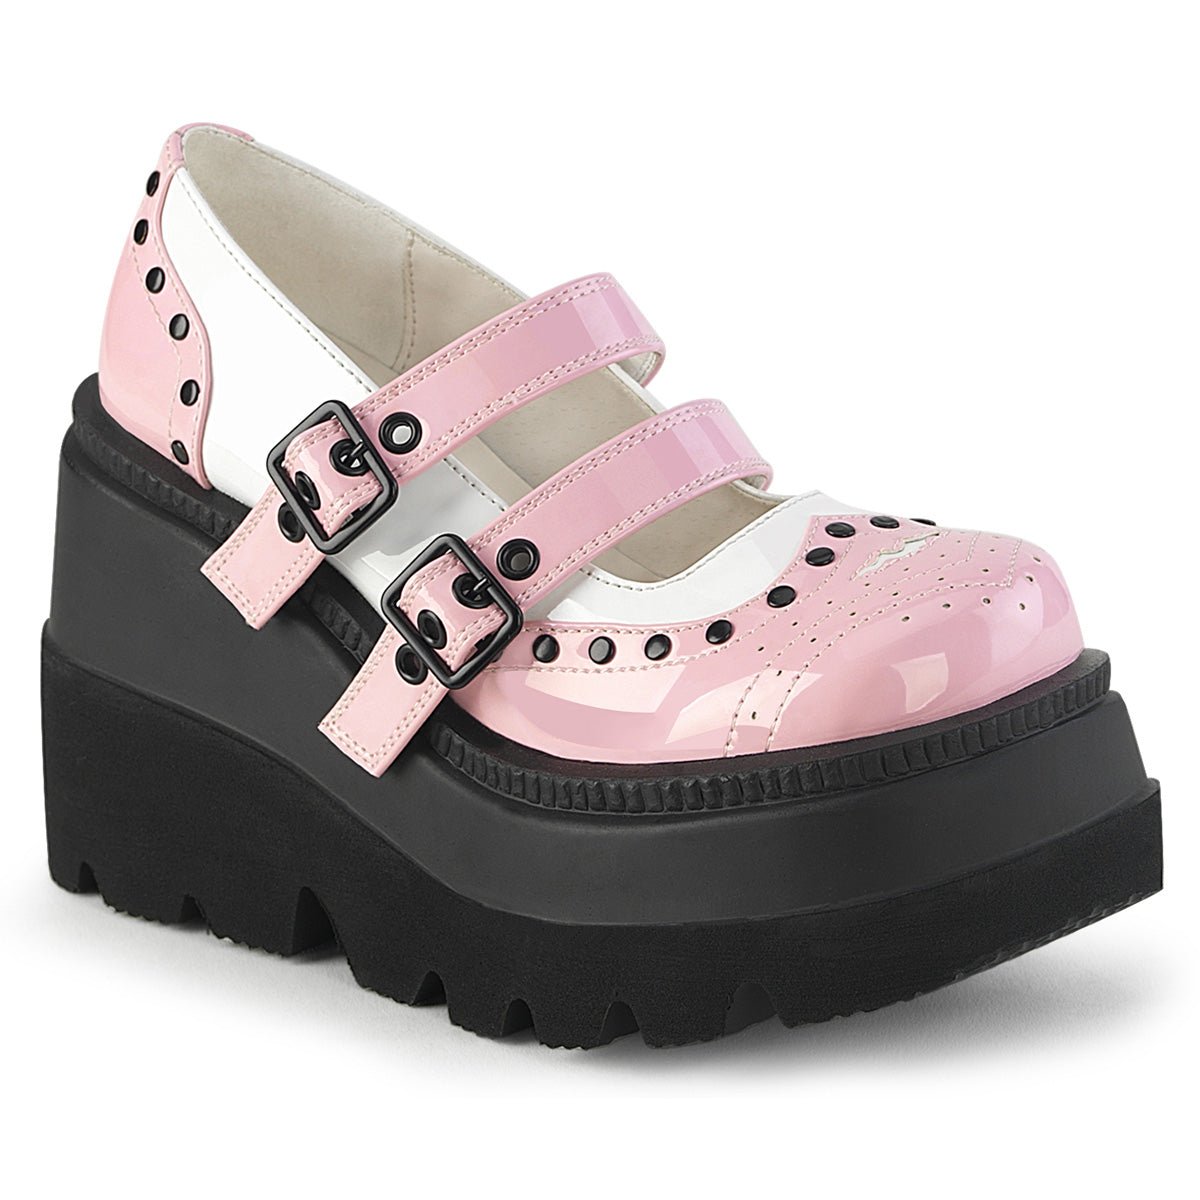 Too Fast | Demonia Shaker 27 | Baby Pink Patent Leather Women&#39;s Mary Janes